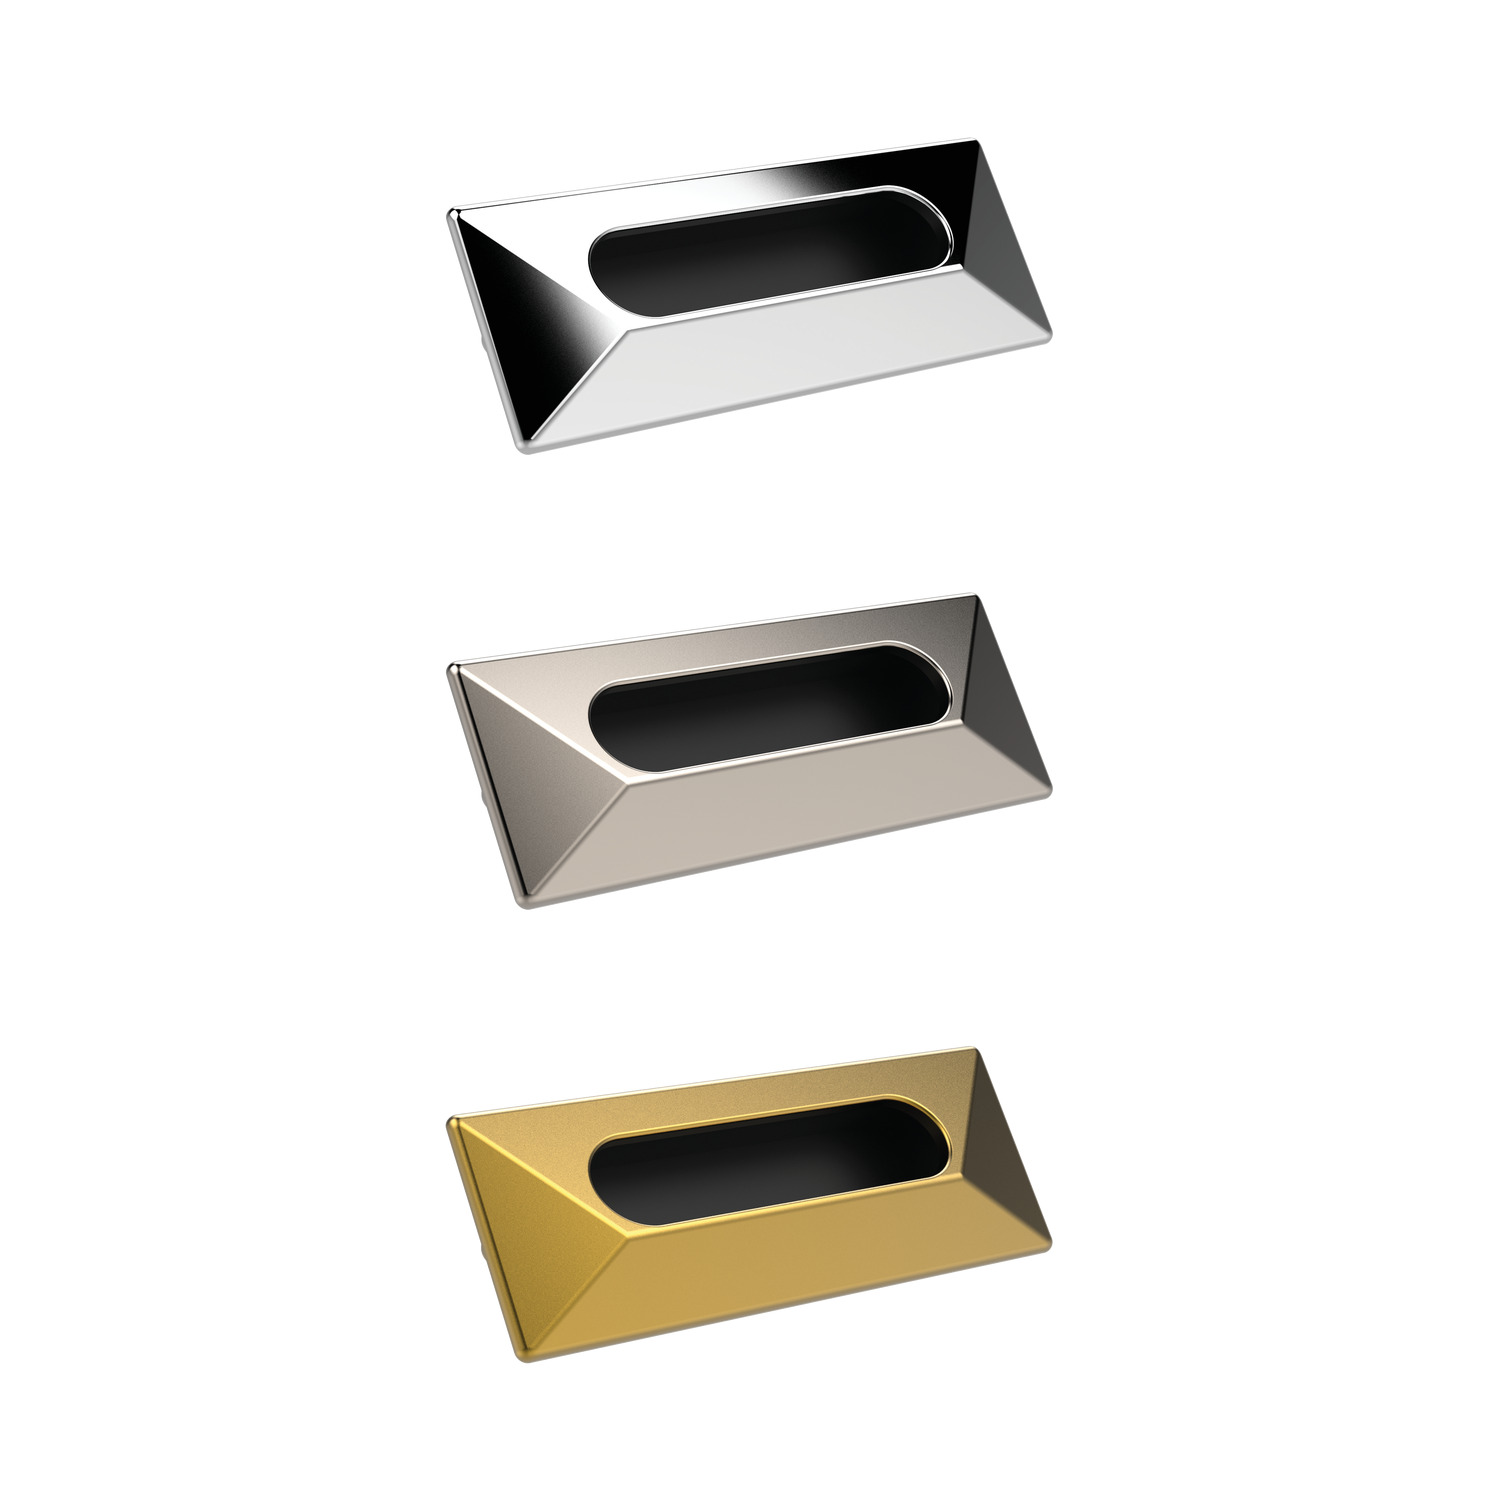 Pull Handles - Recessed Rear mounting pull handles - recessed. Black plastic material supplied with spacer and screws (M4x8).